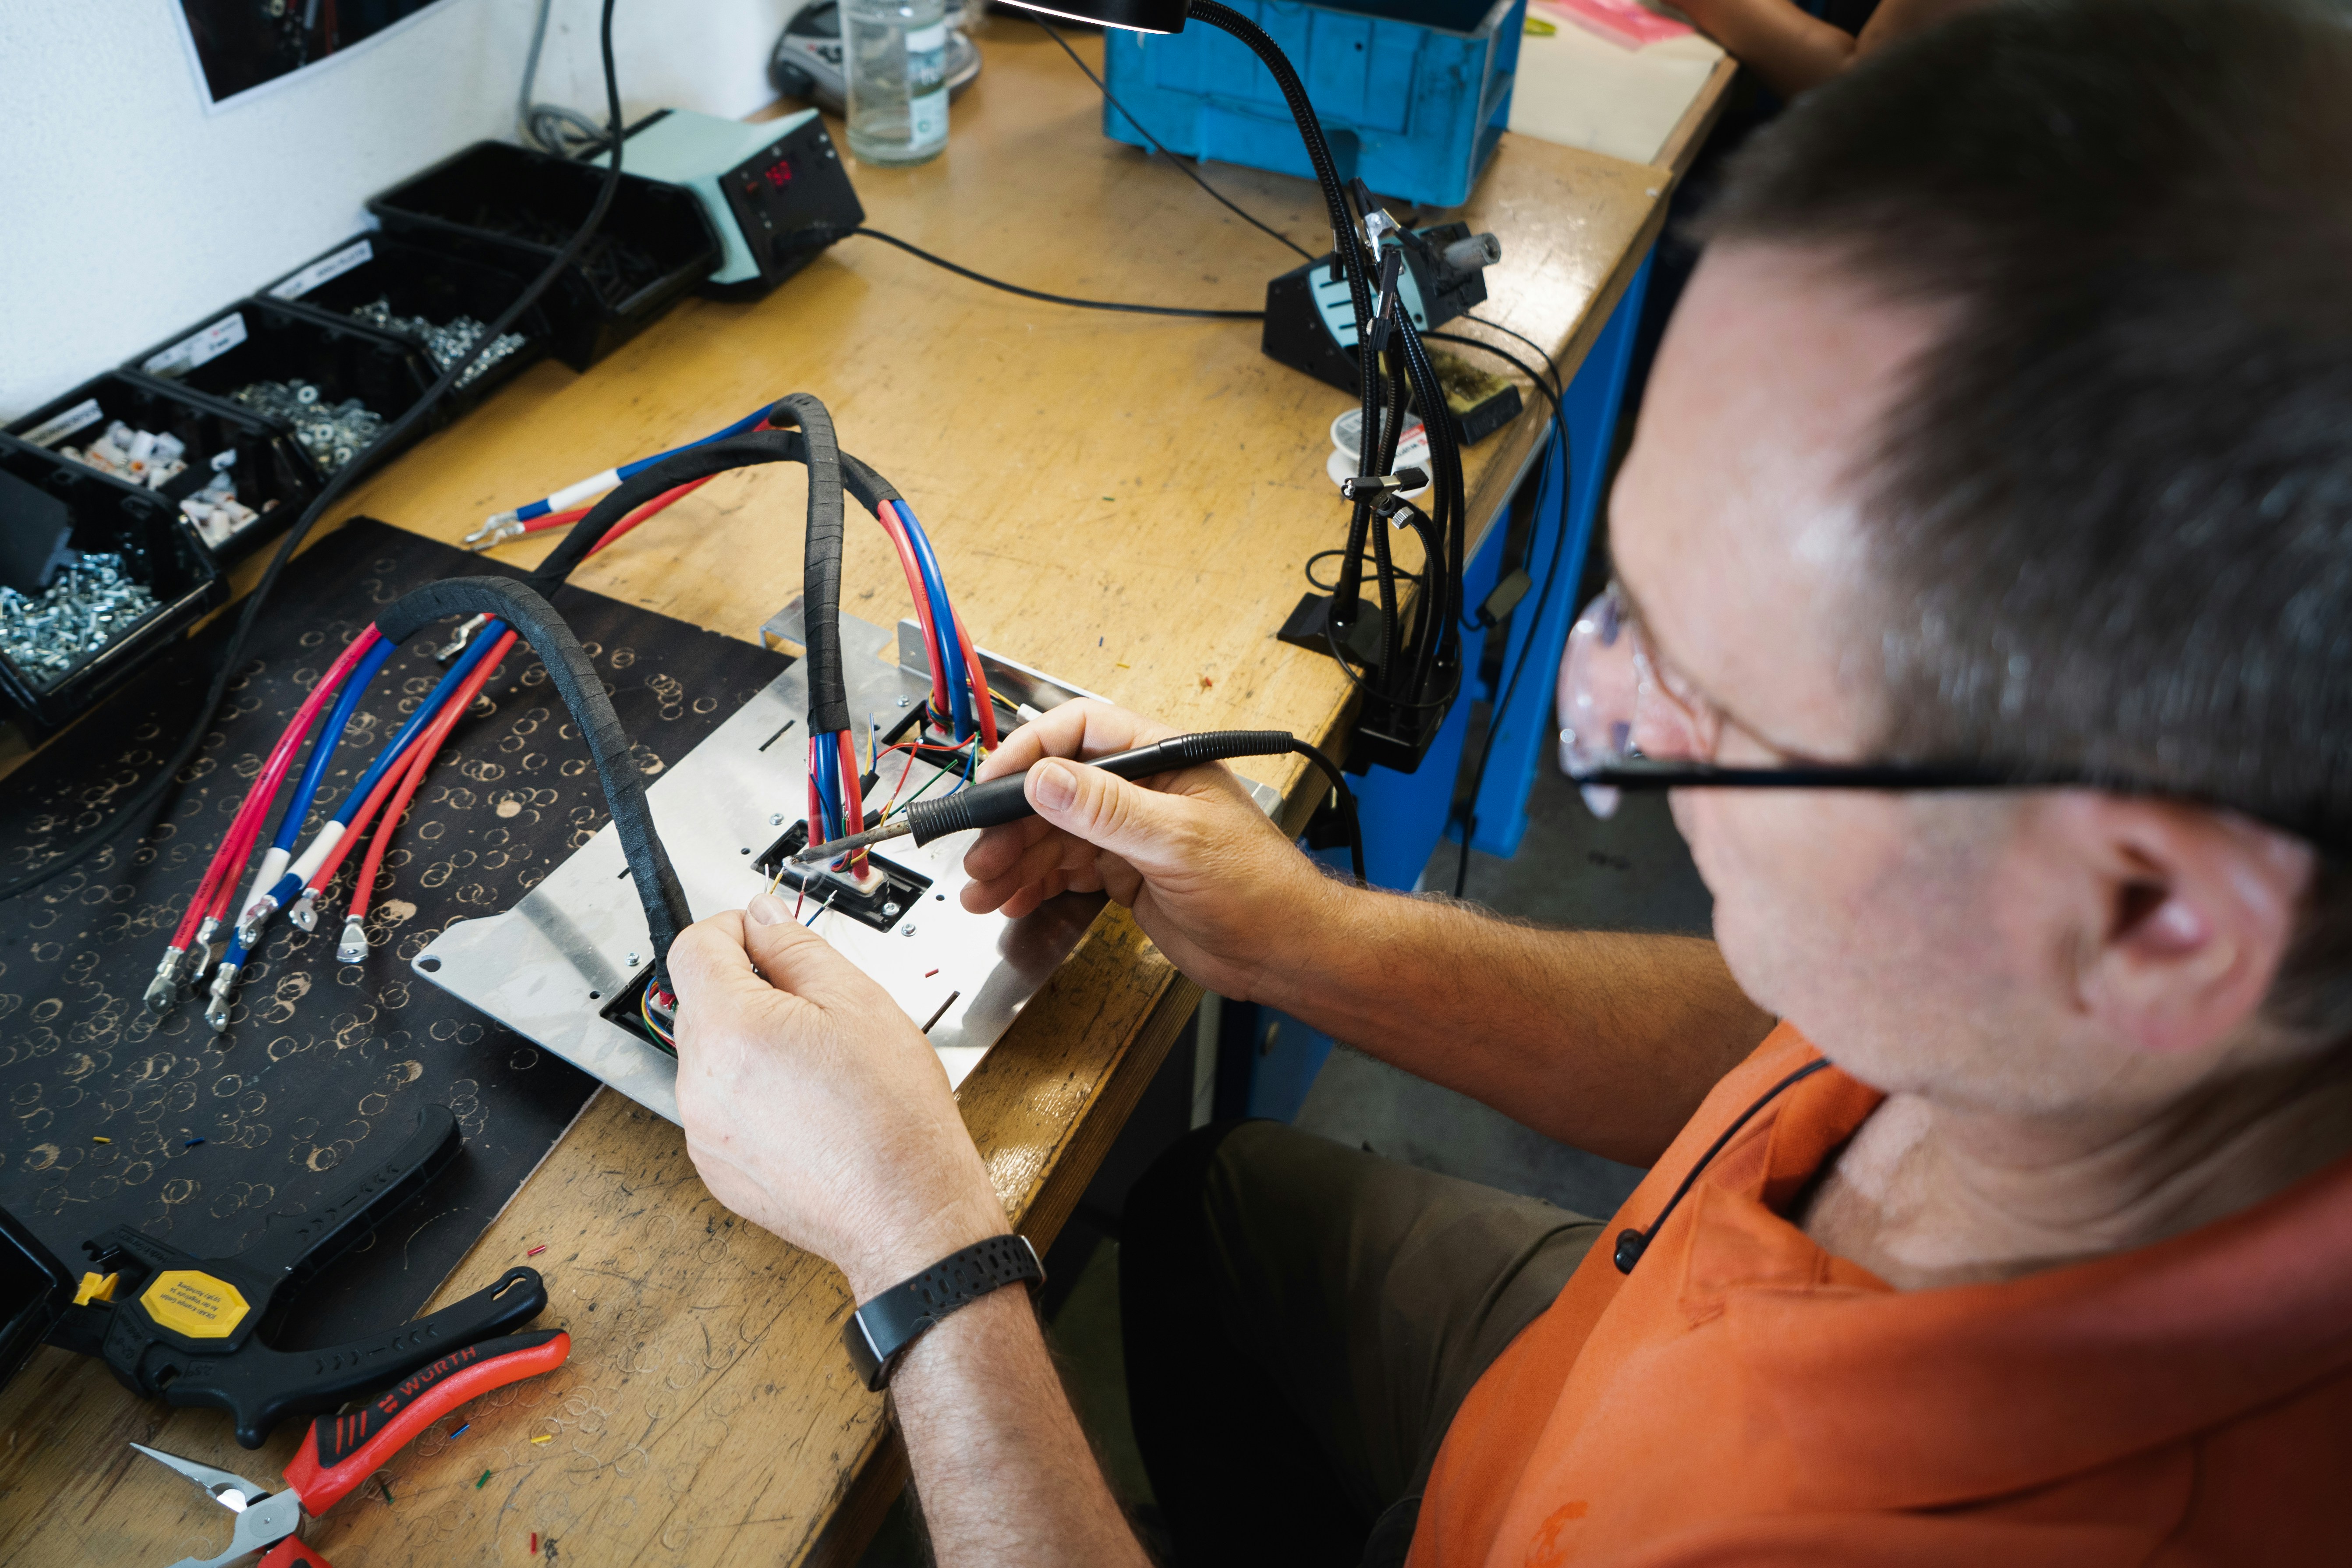 Soldering our wire harness for Kumpan electric scooters.